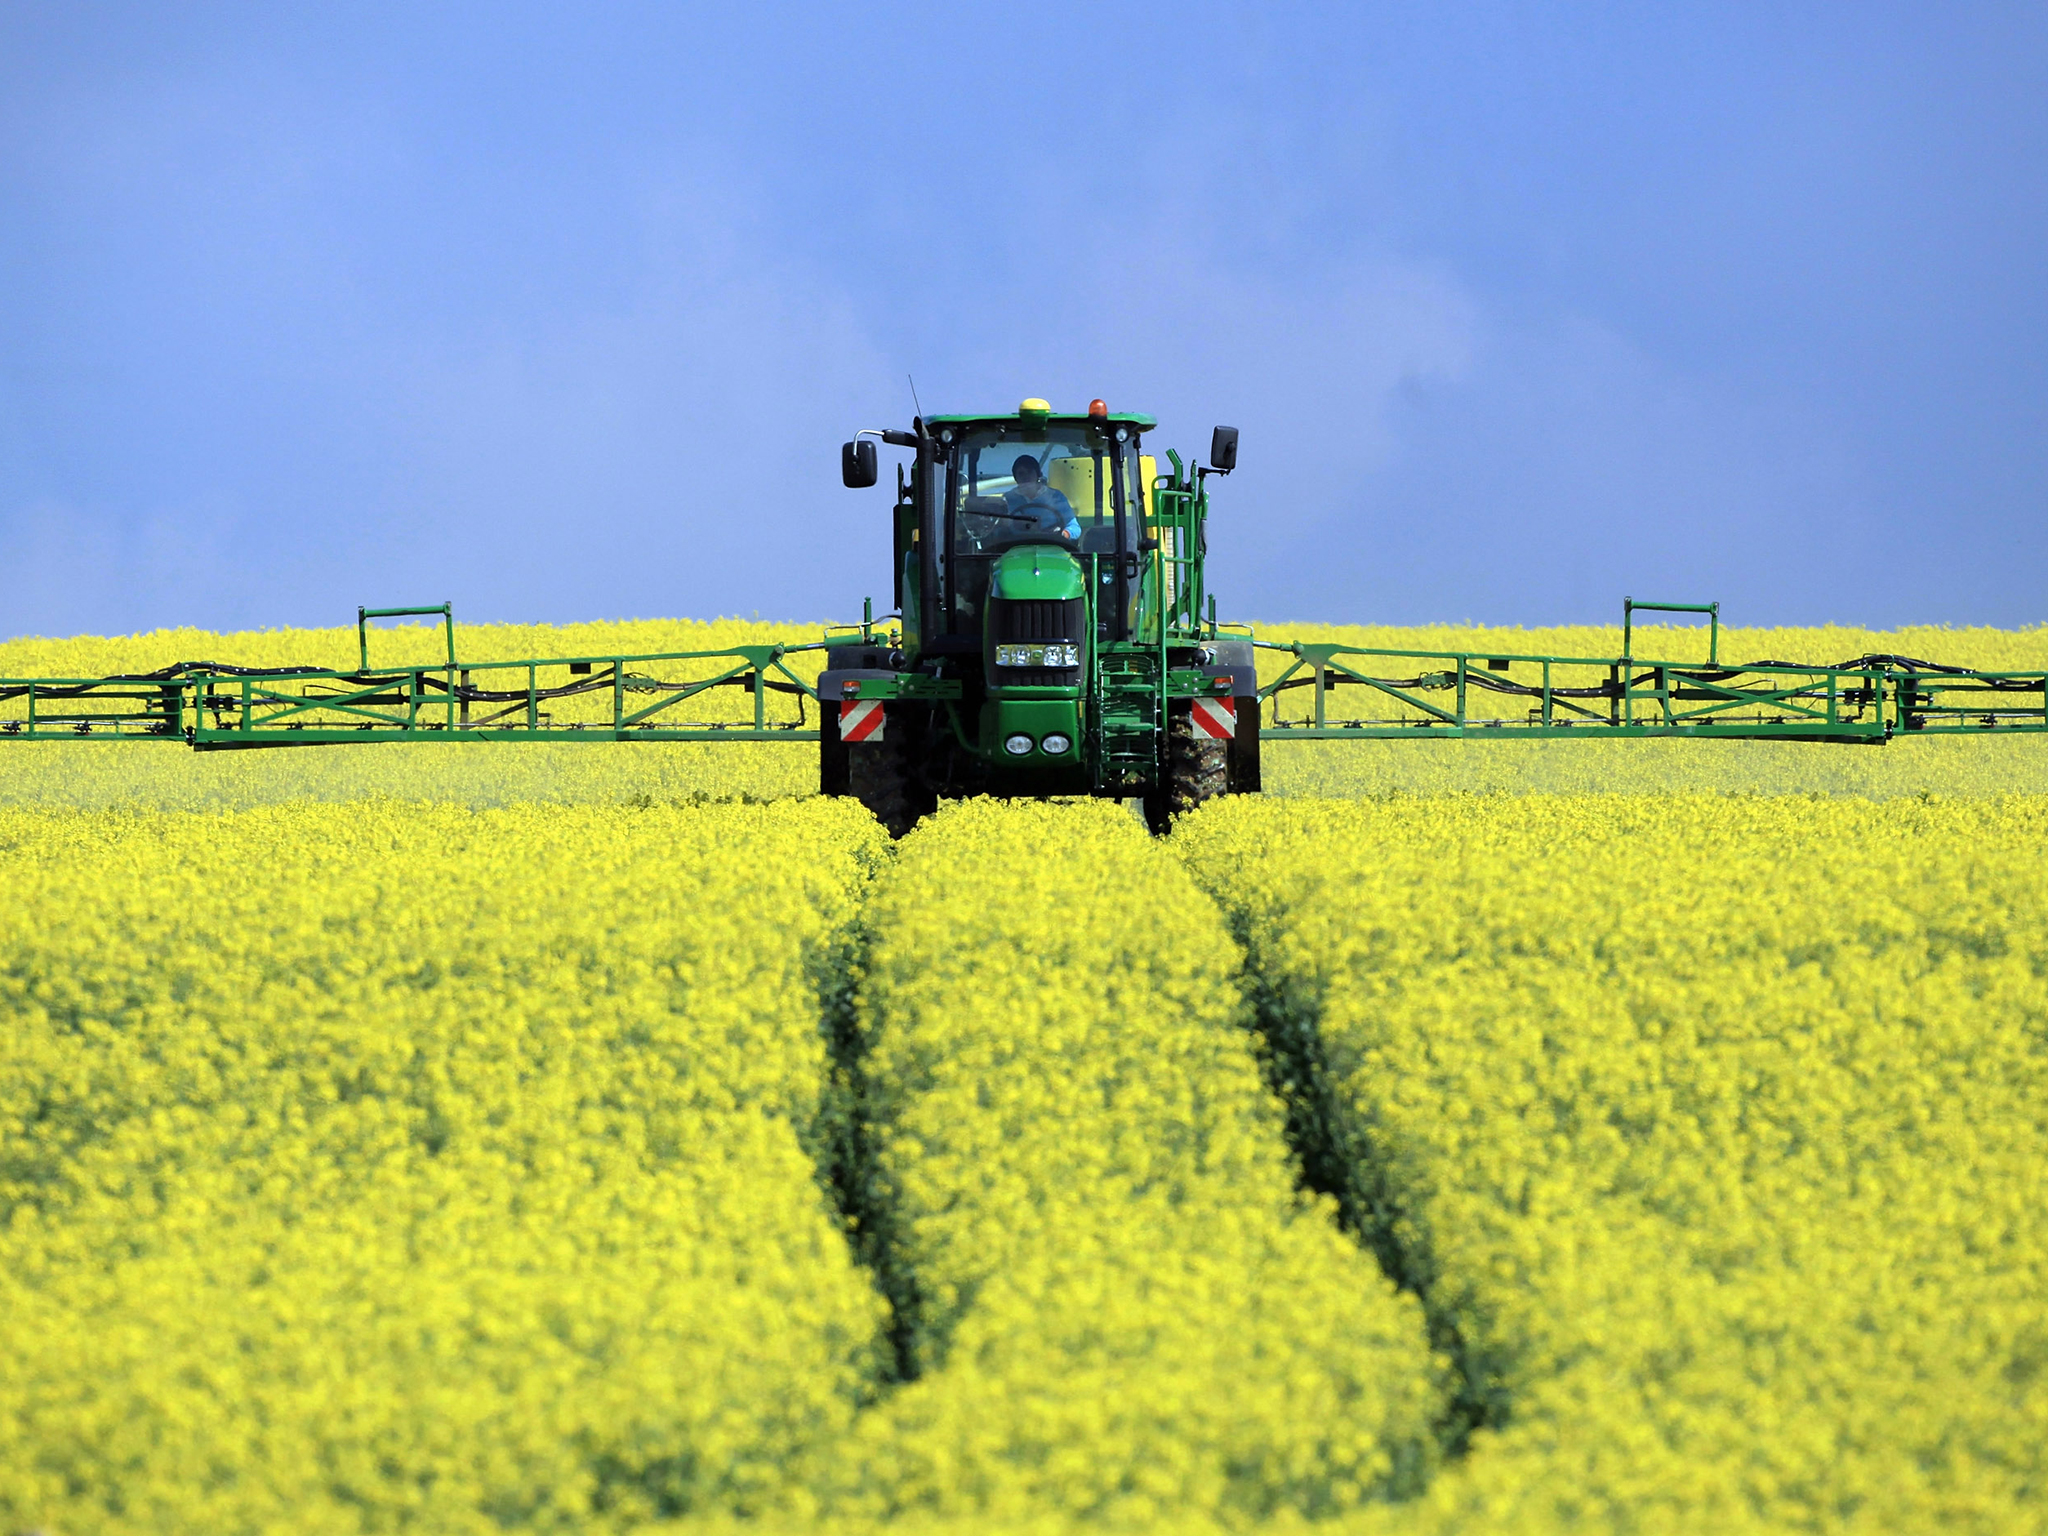 The oilseed rape harvest in 2017 could fall to its lowest level in 13 years